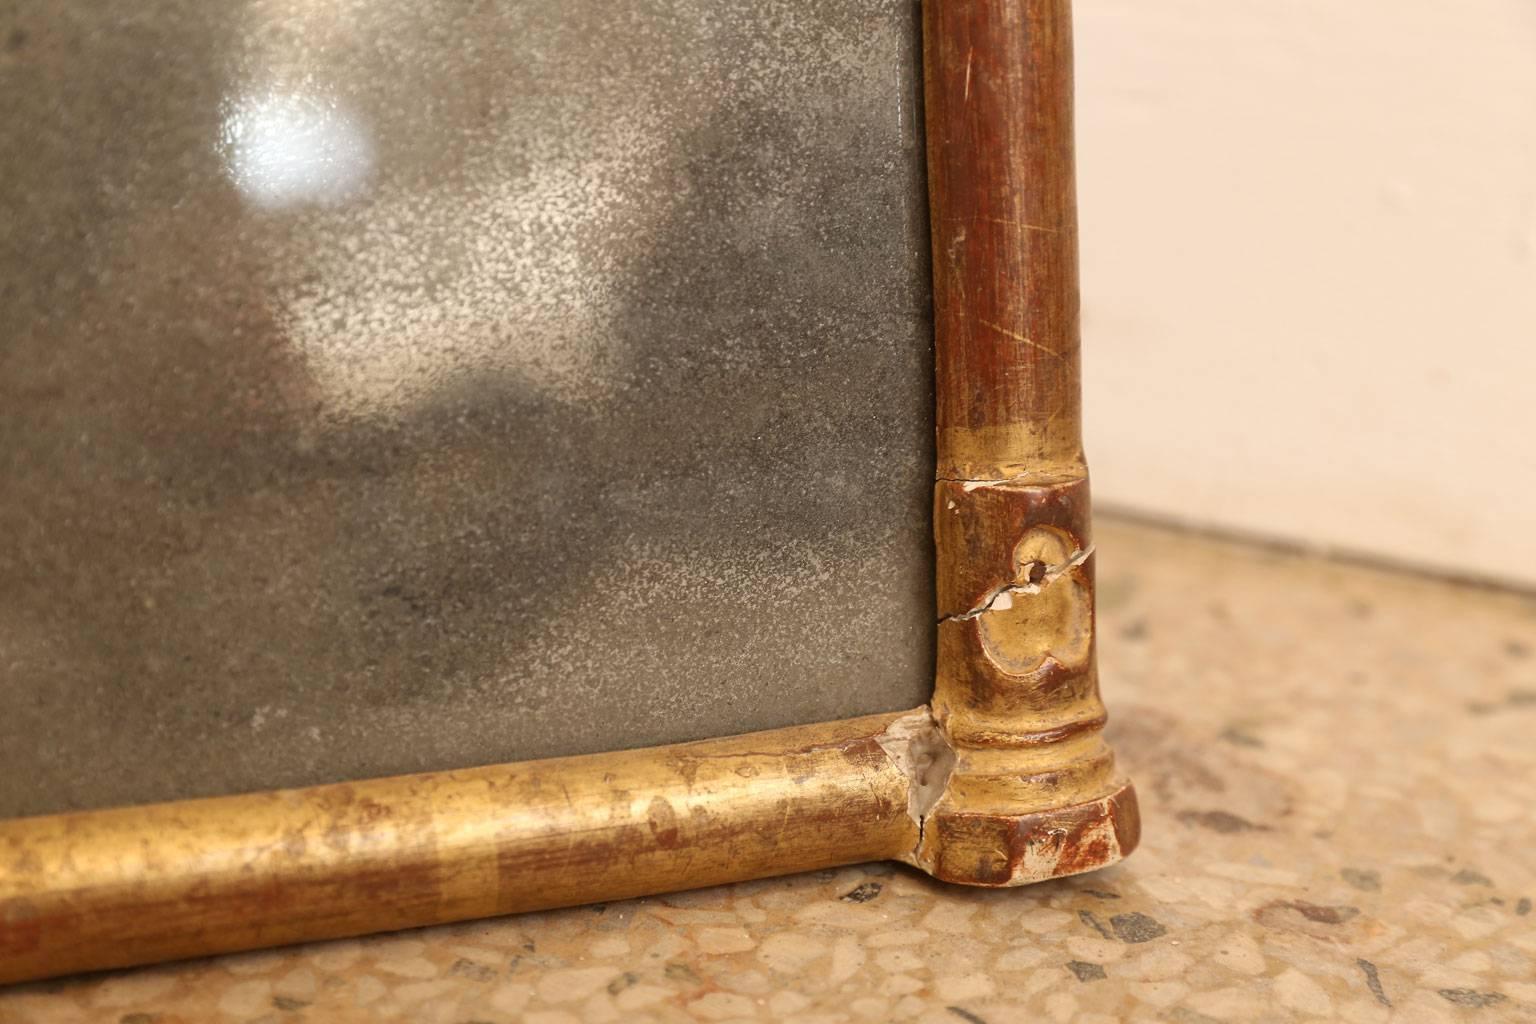 Small giltwood mirror in neo-gothic style from France. This diminutive 19th century mirror consists of a gilded hand carved wooden frame with its original mercury mirror. Perfectly suited to display on a shelf or tabletop.